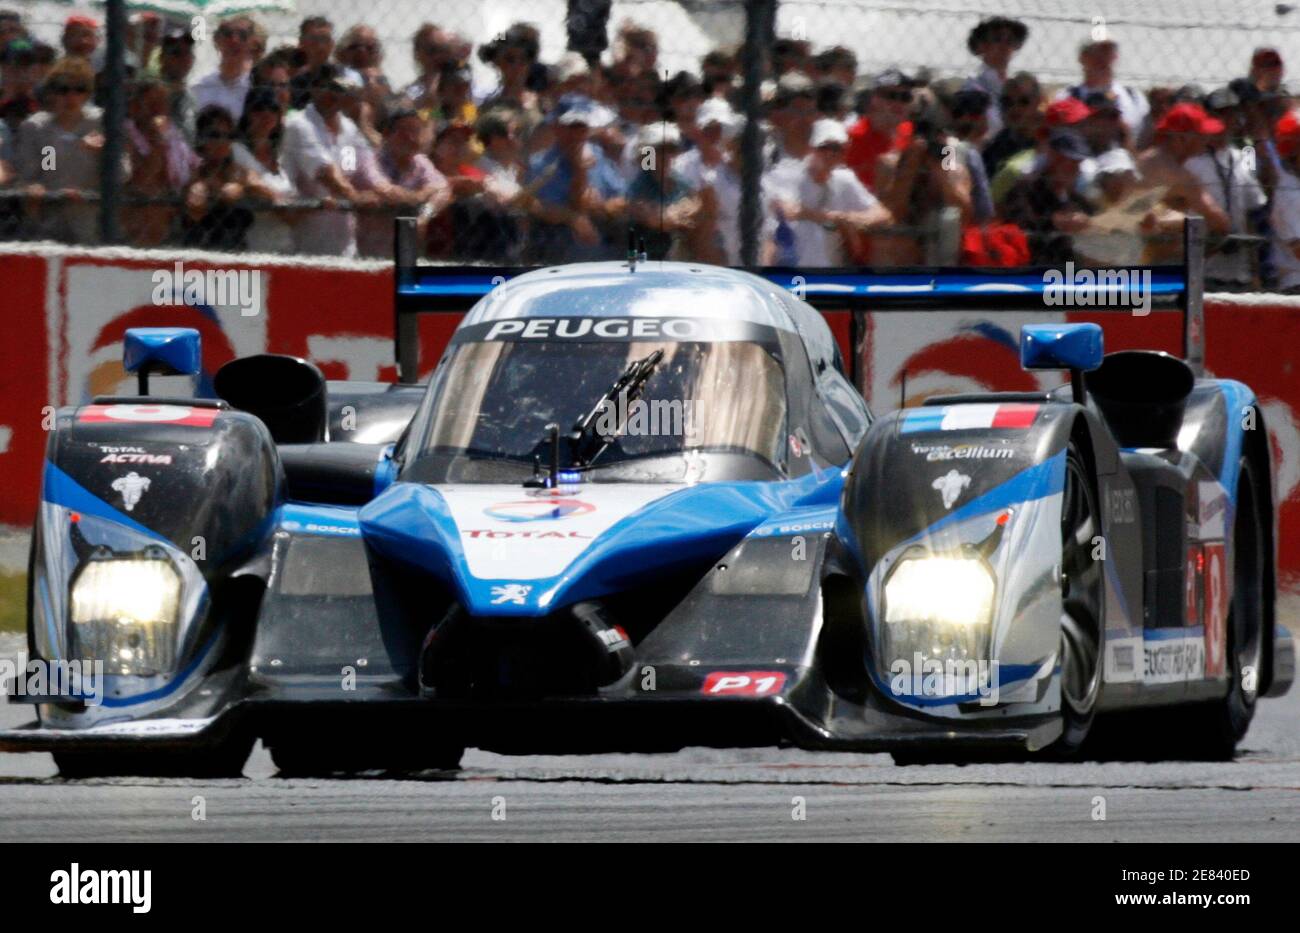 France's Franck Montagny drives his Peugeot 908 HDI FAP number 8 during the  Le Mans 24 Hour sportscar race in Le Mans, central France, June 13, 2009.  Peugeot 908 HDI FAP number